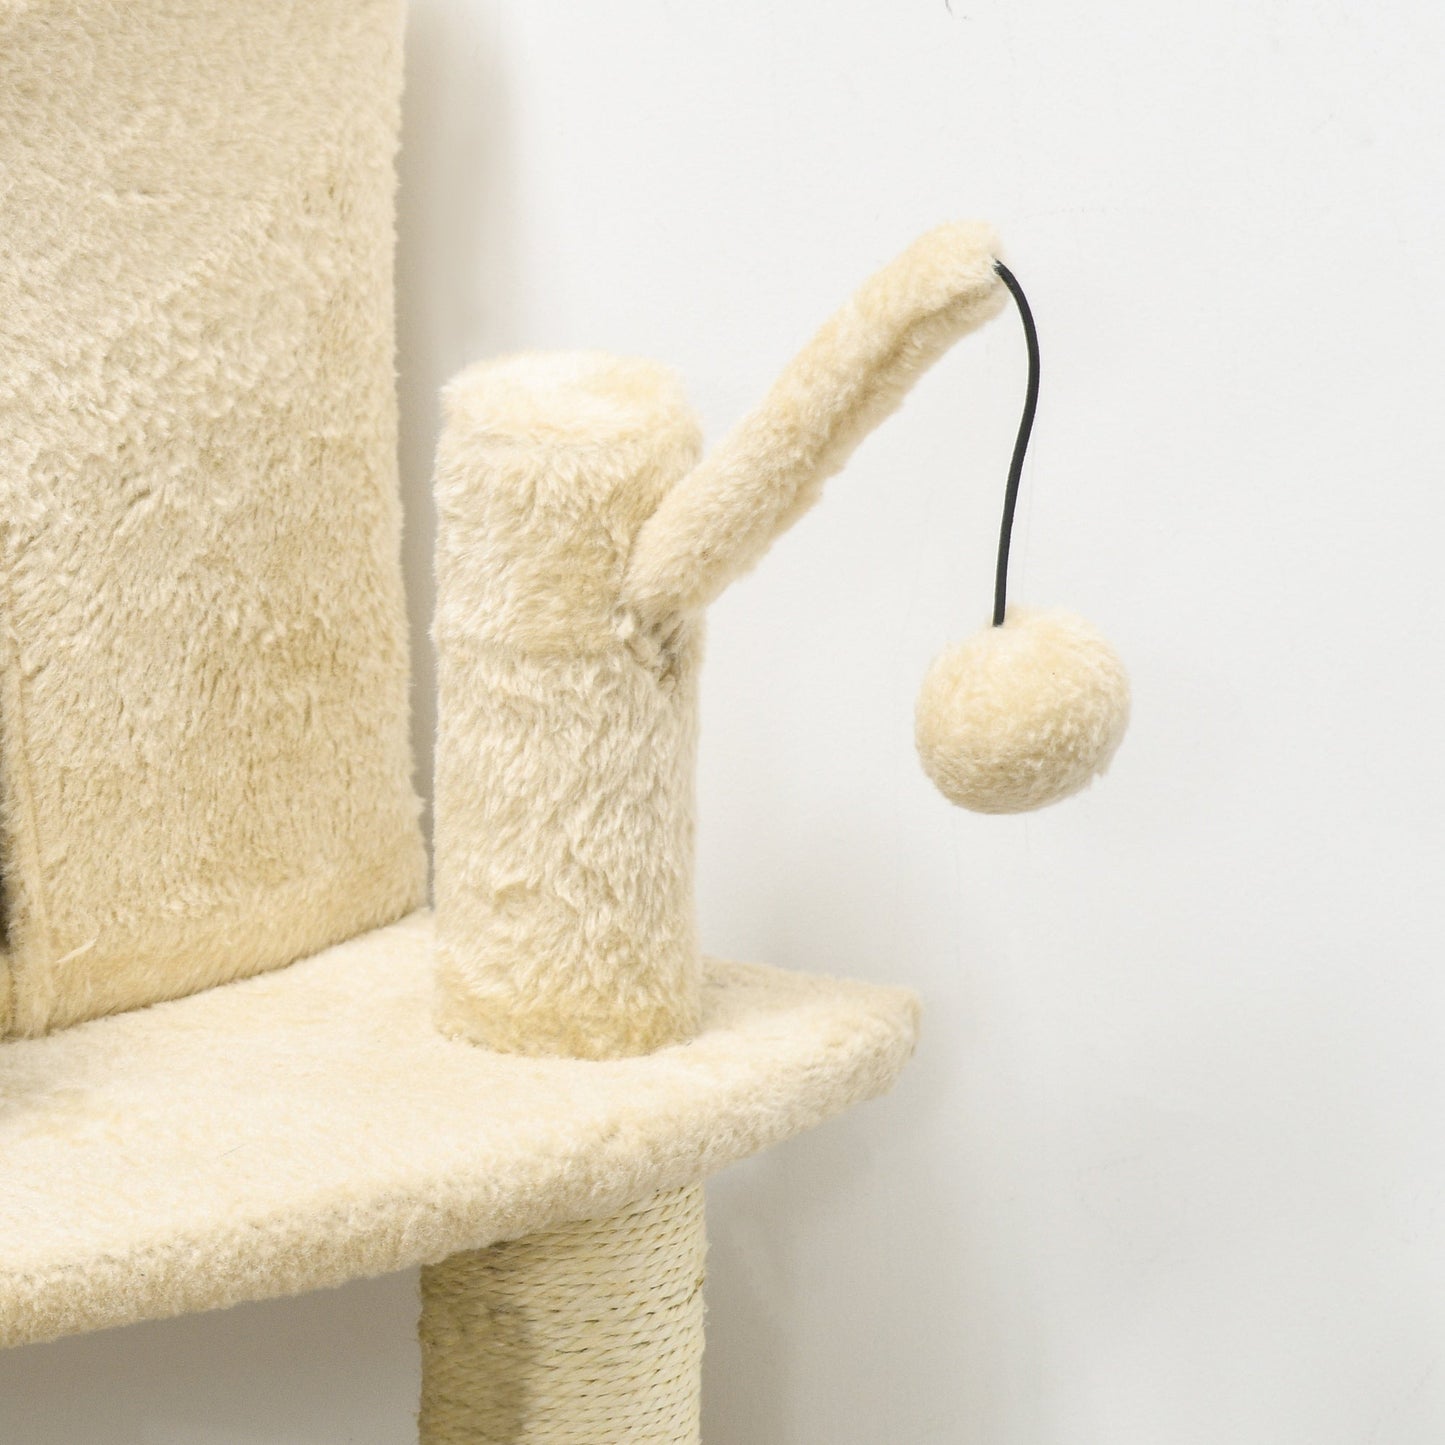 100cm Cat Tree Tower With Sisal Scratching Post Cream White